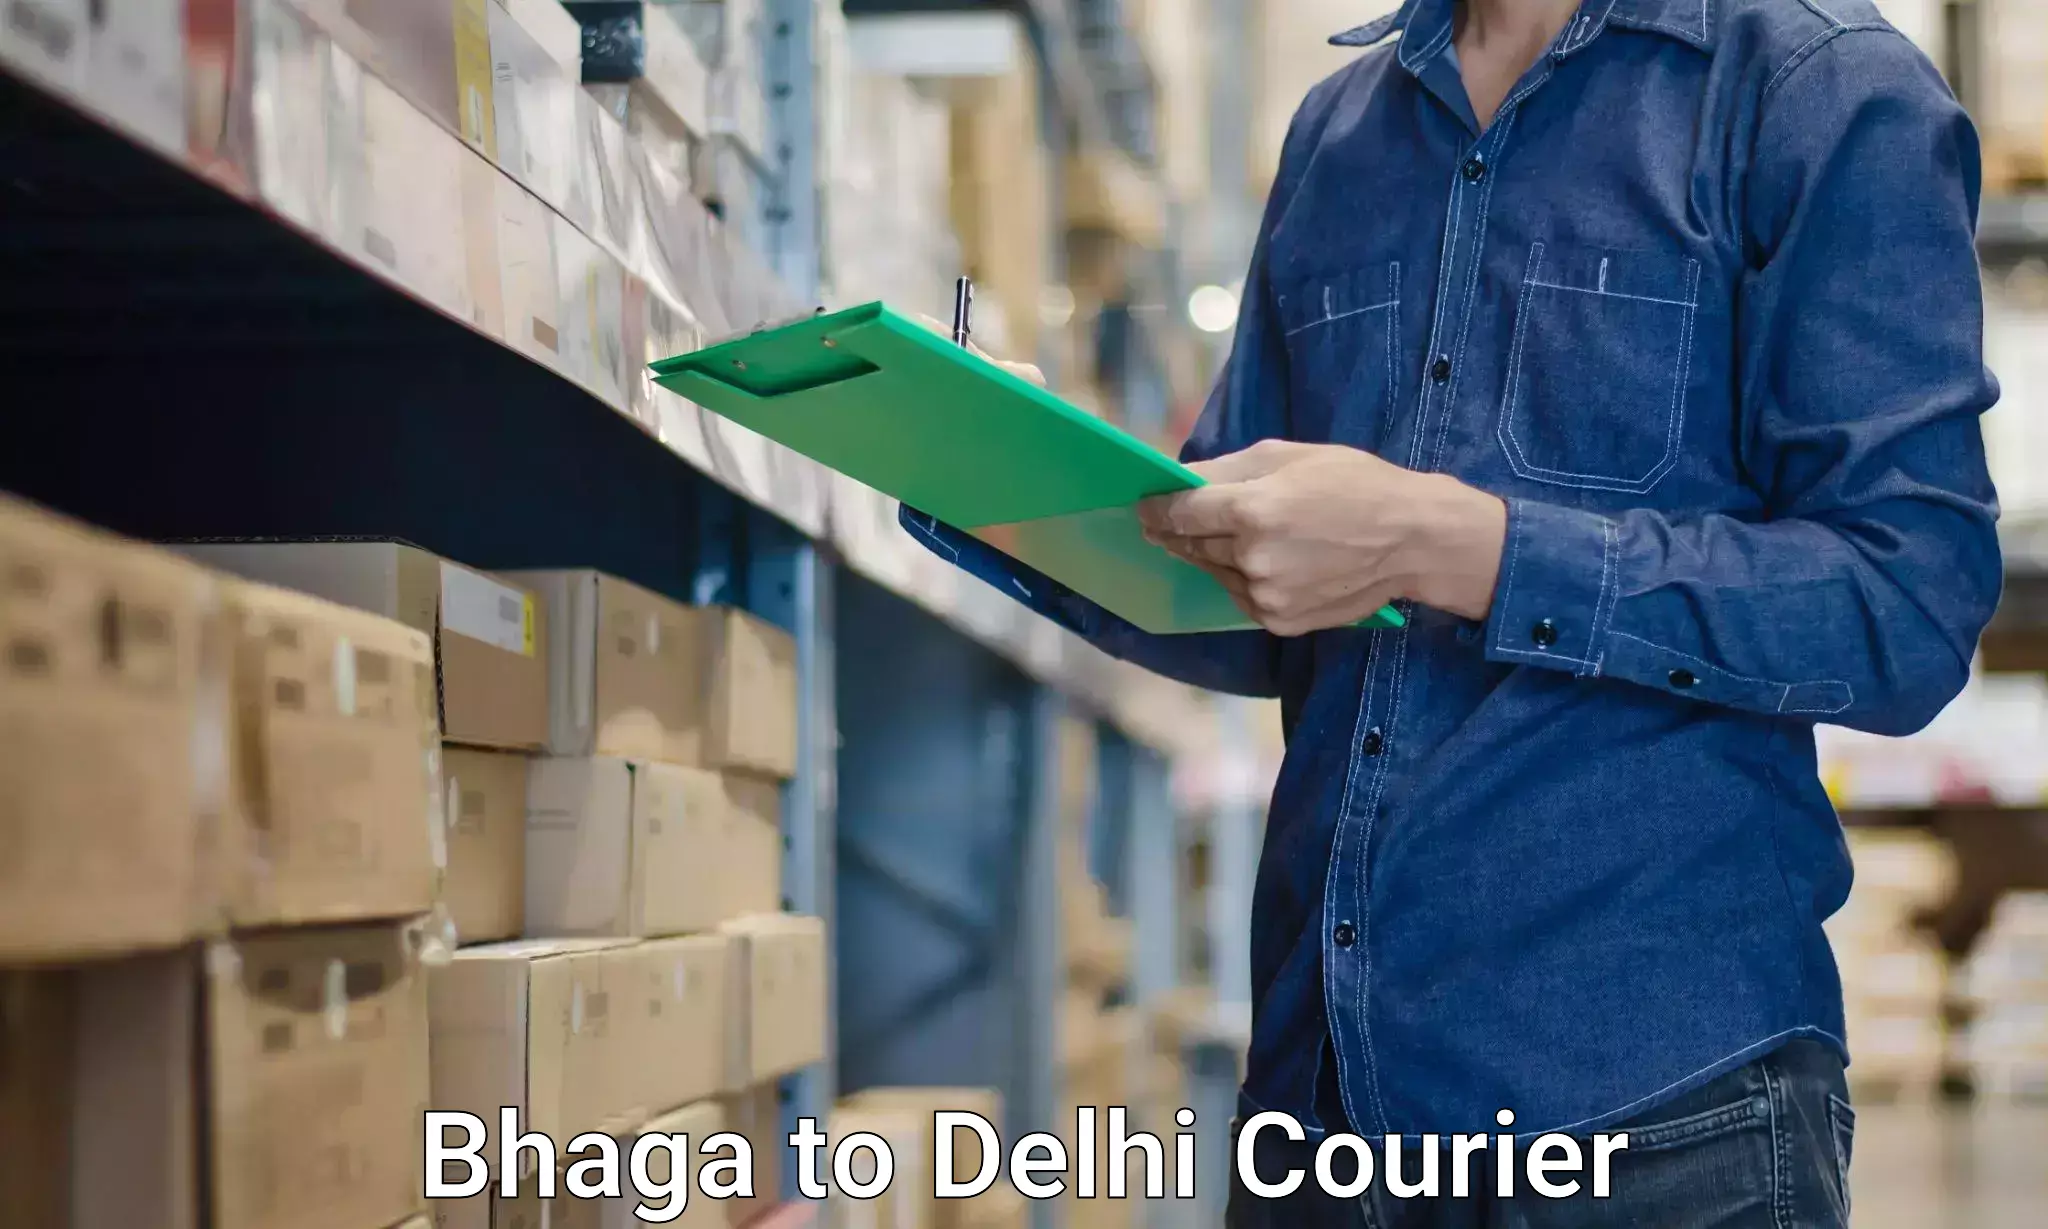 Home moving specialists Bhaga to Lodhi Road